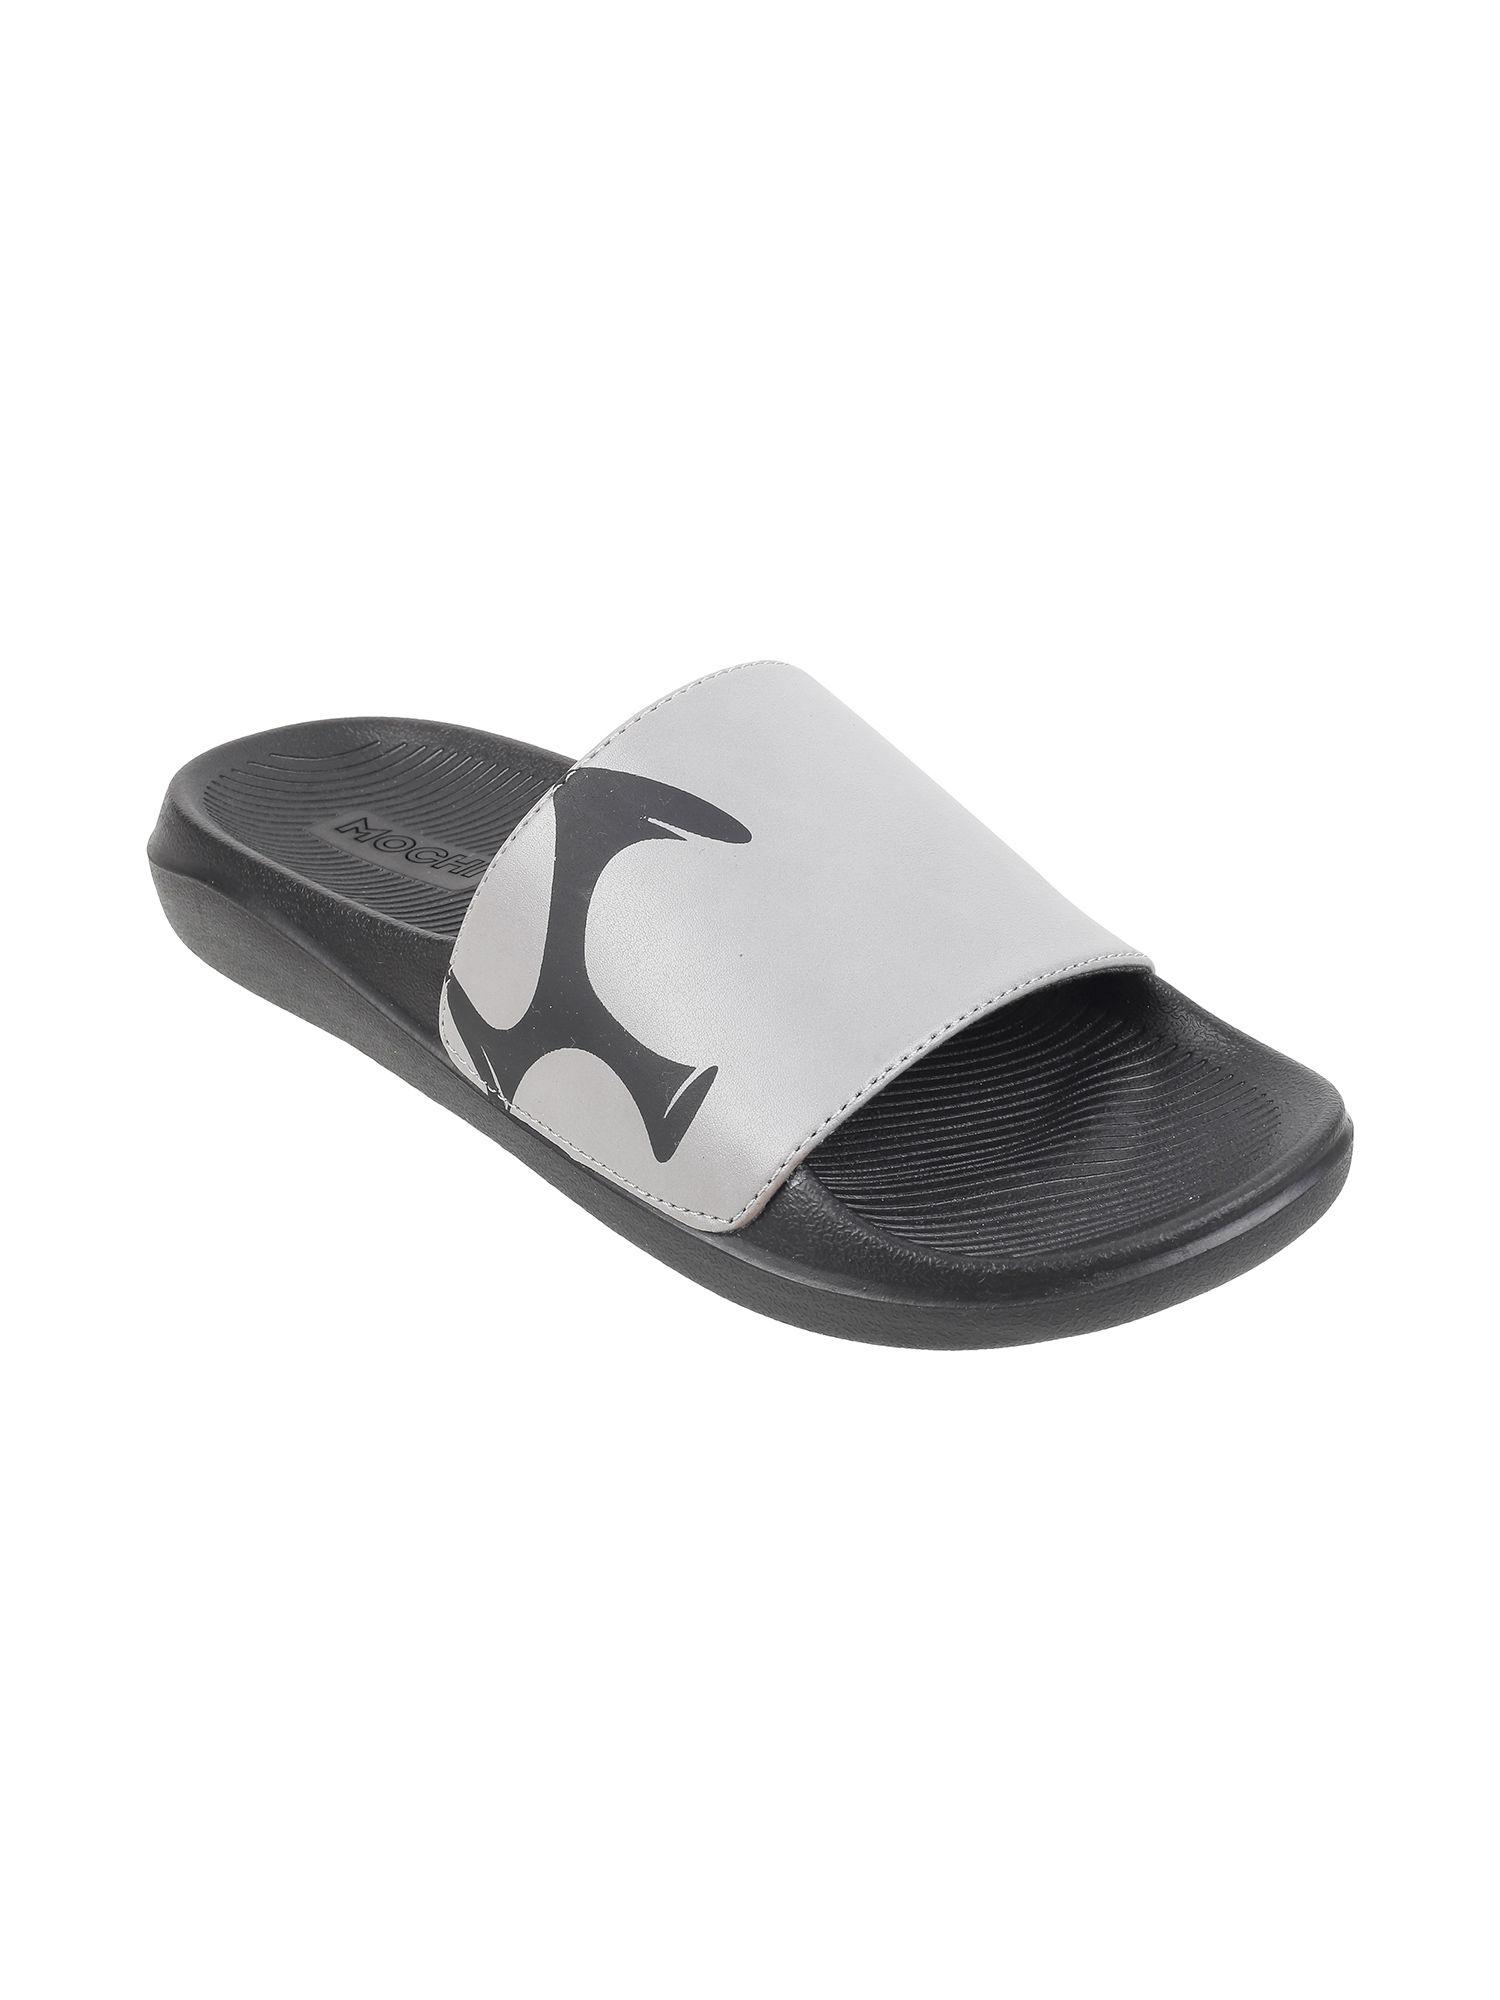 comfortable-mens-synthetic-grey-sliders